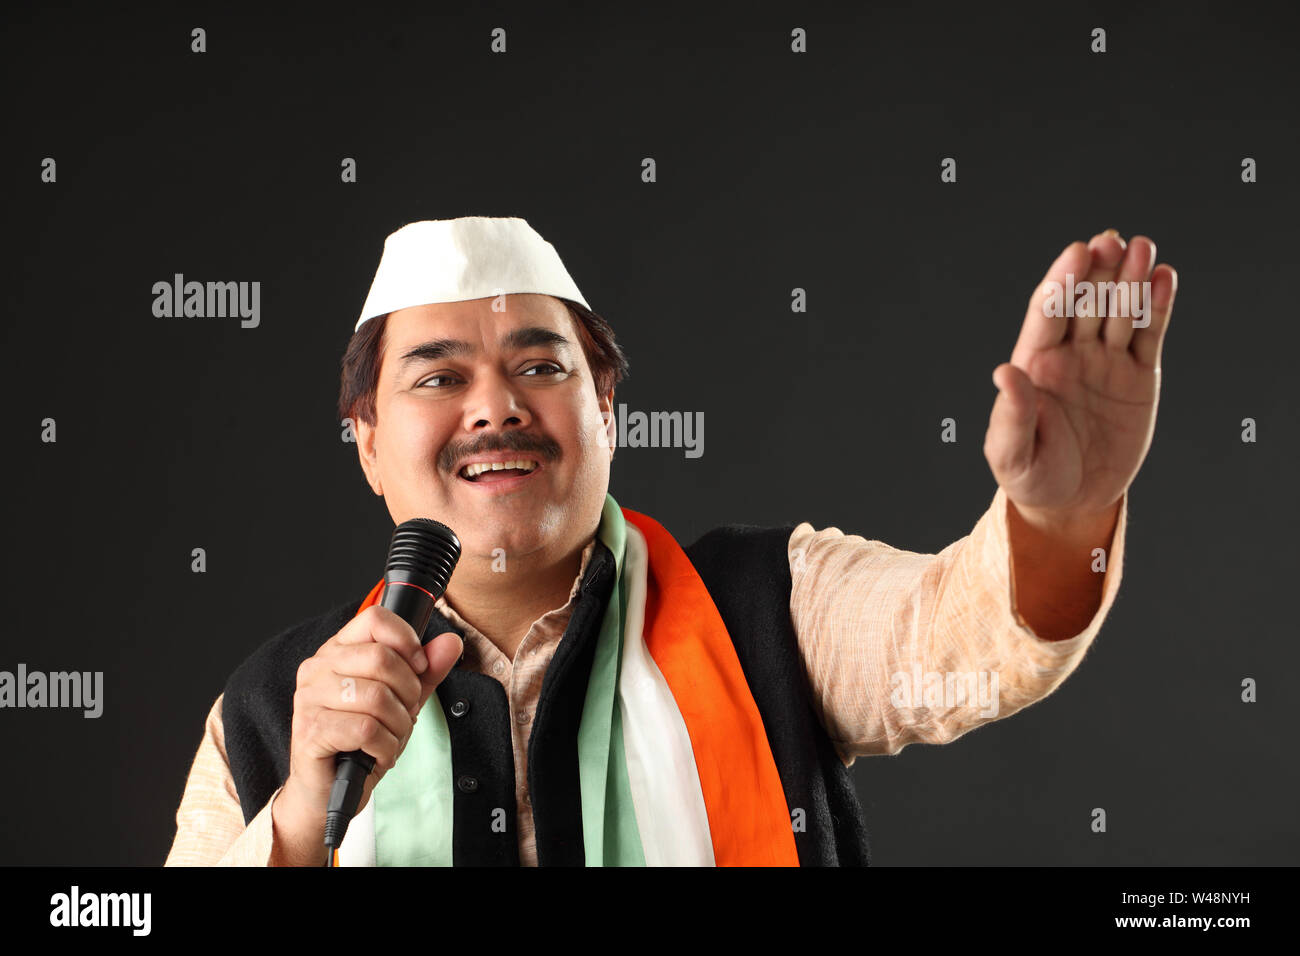 Indian politician giving speech and waving hands Stock Photo